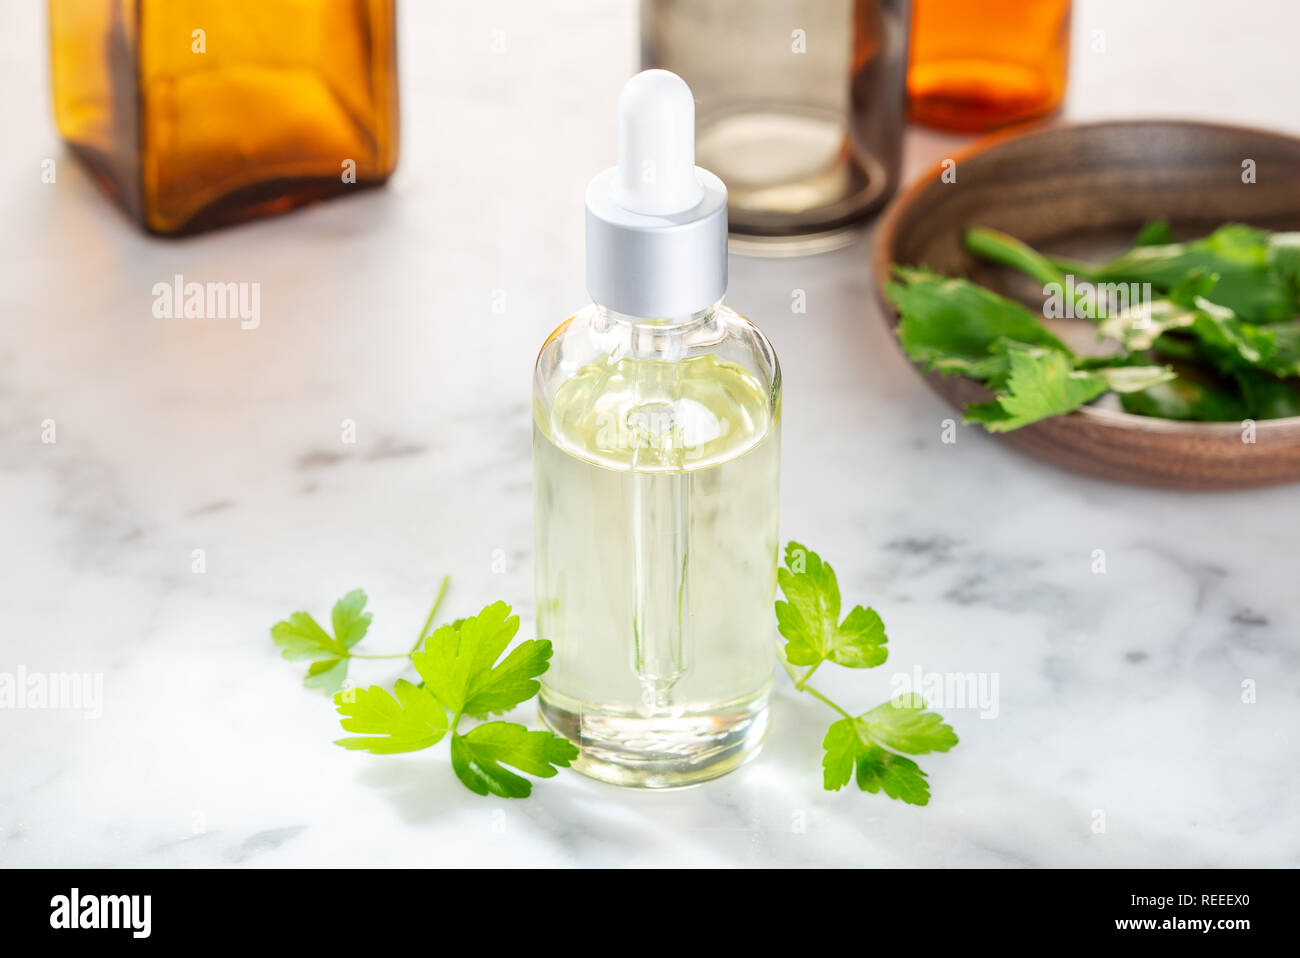 Parsley essential oil. Parsley oil for skin care, spa, wellness, massage, aromatherapy and natural medicine Stock Photo